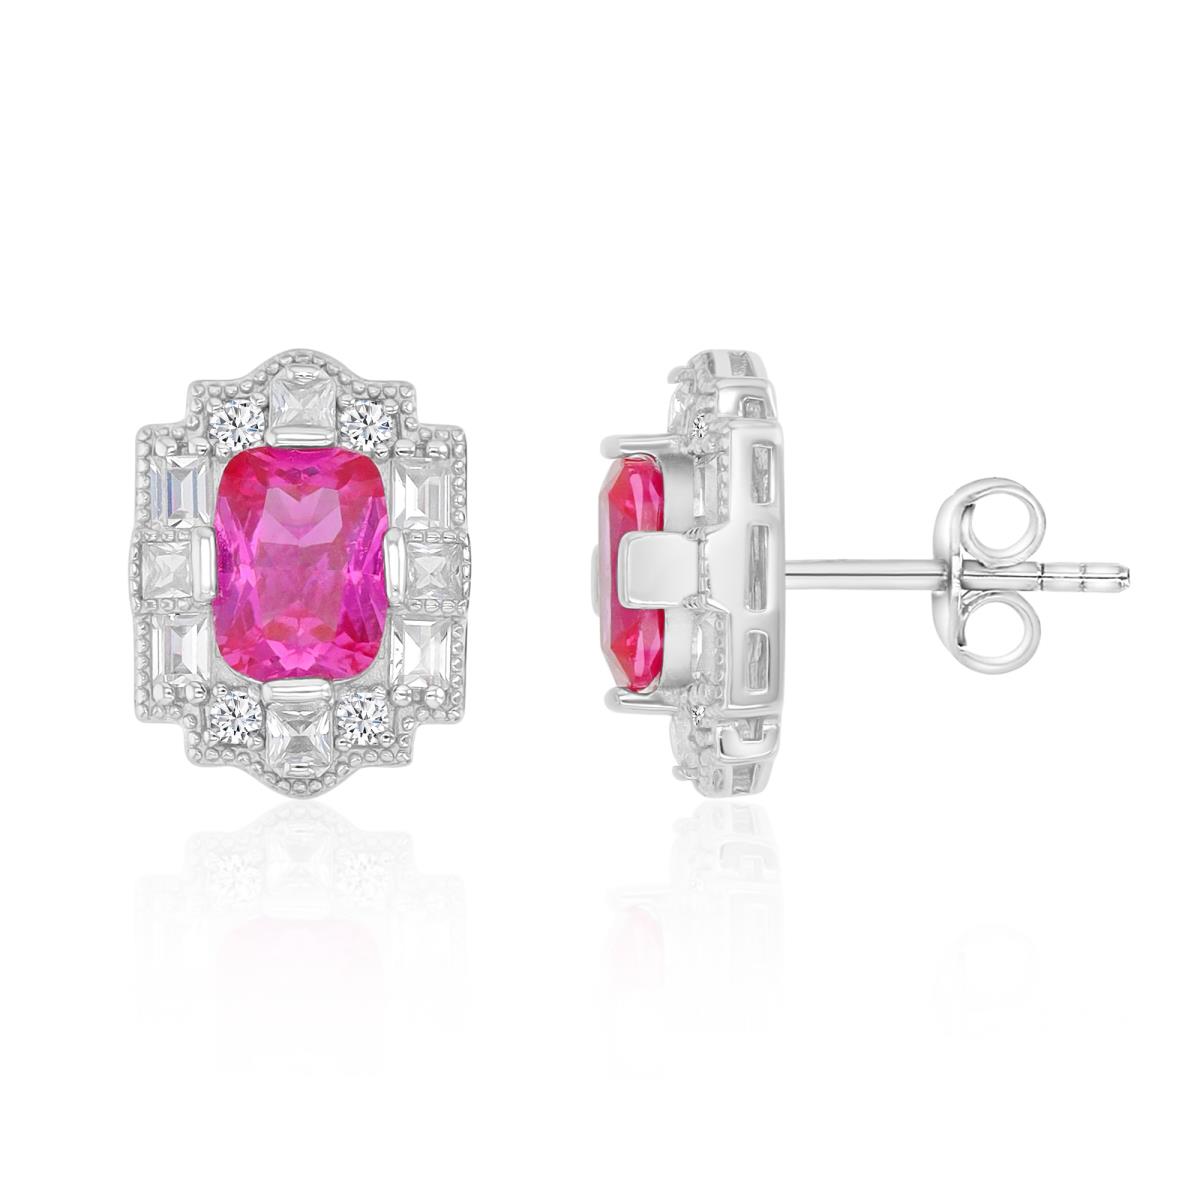 Sterling Silver Rhodium 15X11MM Polished Cr Pink & Cr White Sapphire Vintage Cushion Cut Stud Earrings